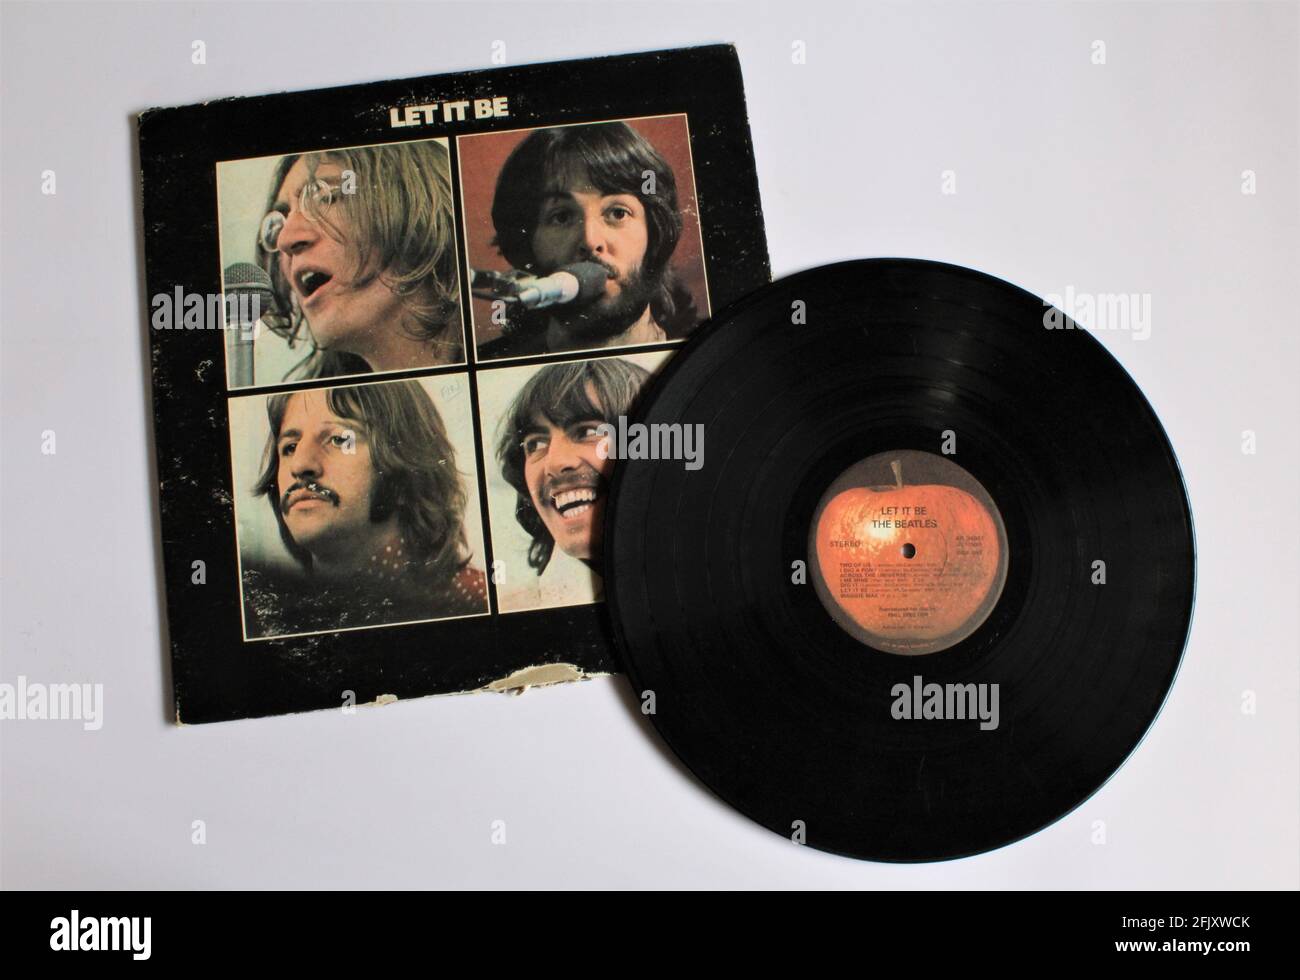 Let it Be is a record by the English rock band The Beatles. This music album is on a vinyl record LP disc. Psychedelic pop music. Stock Photo